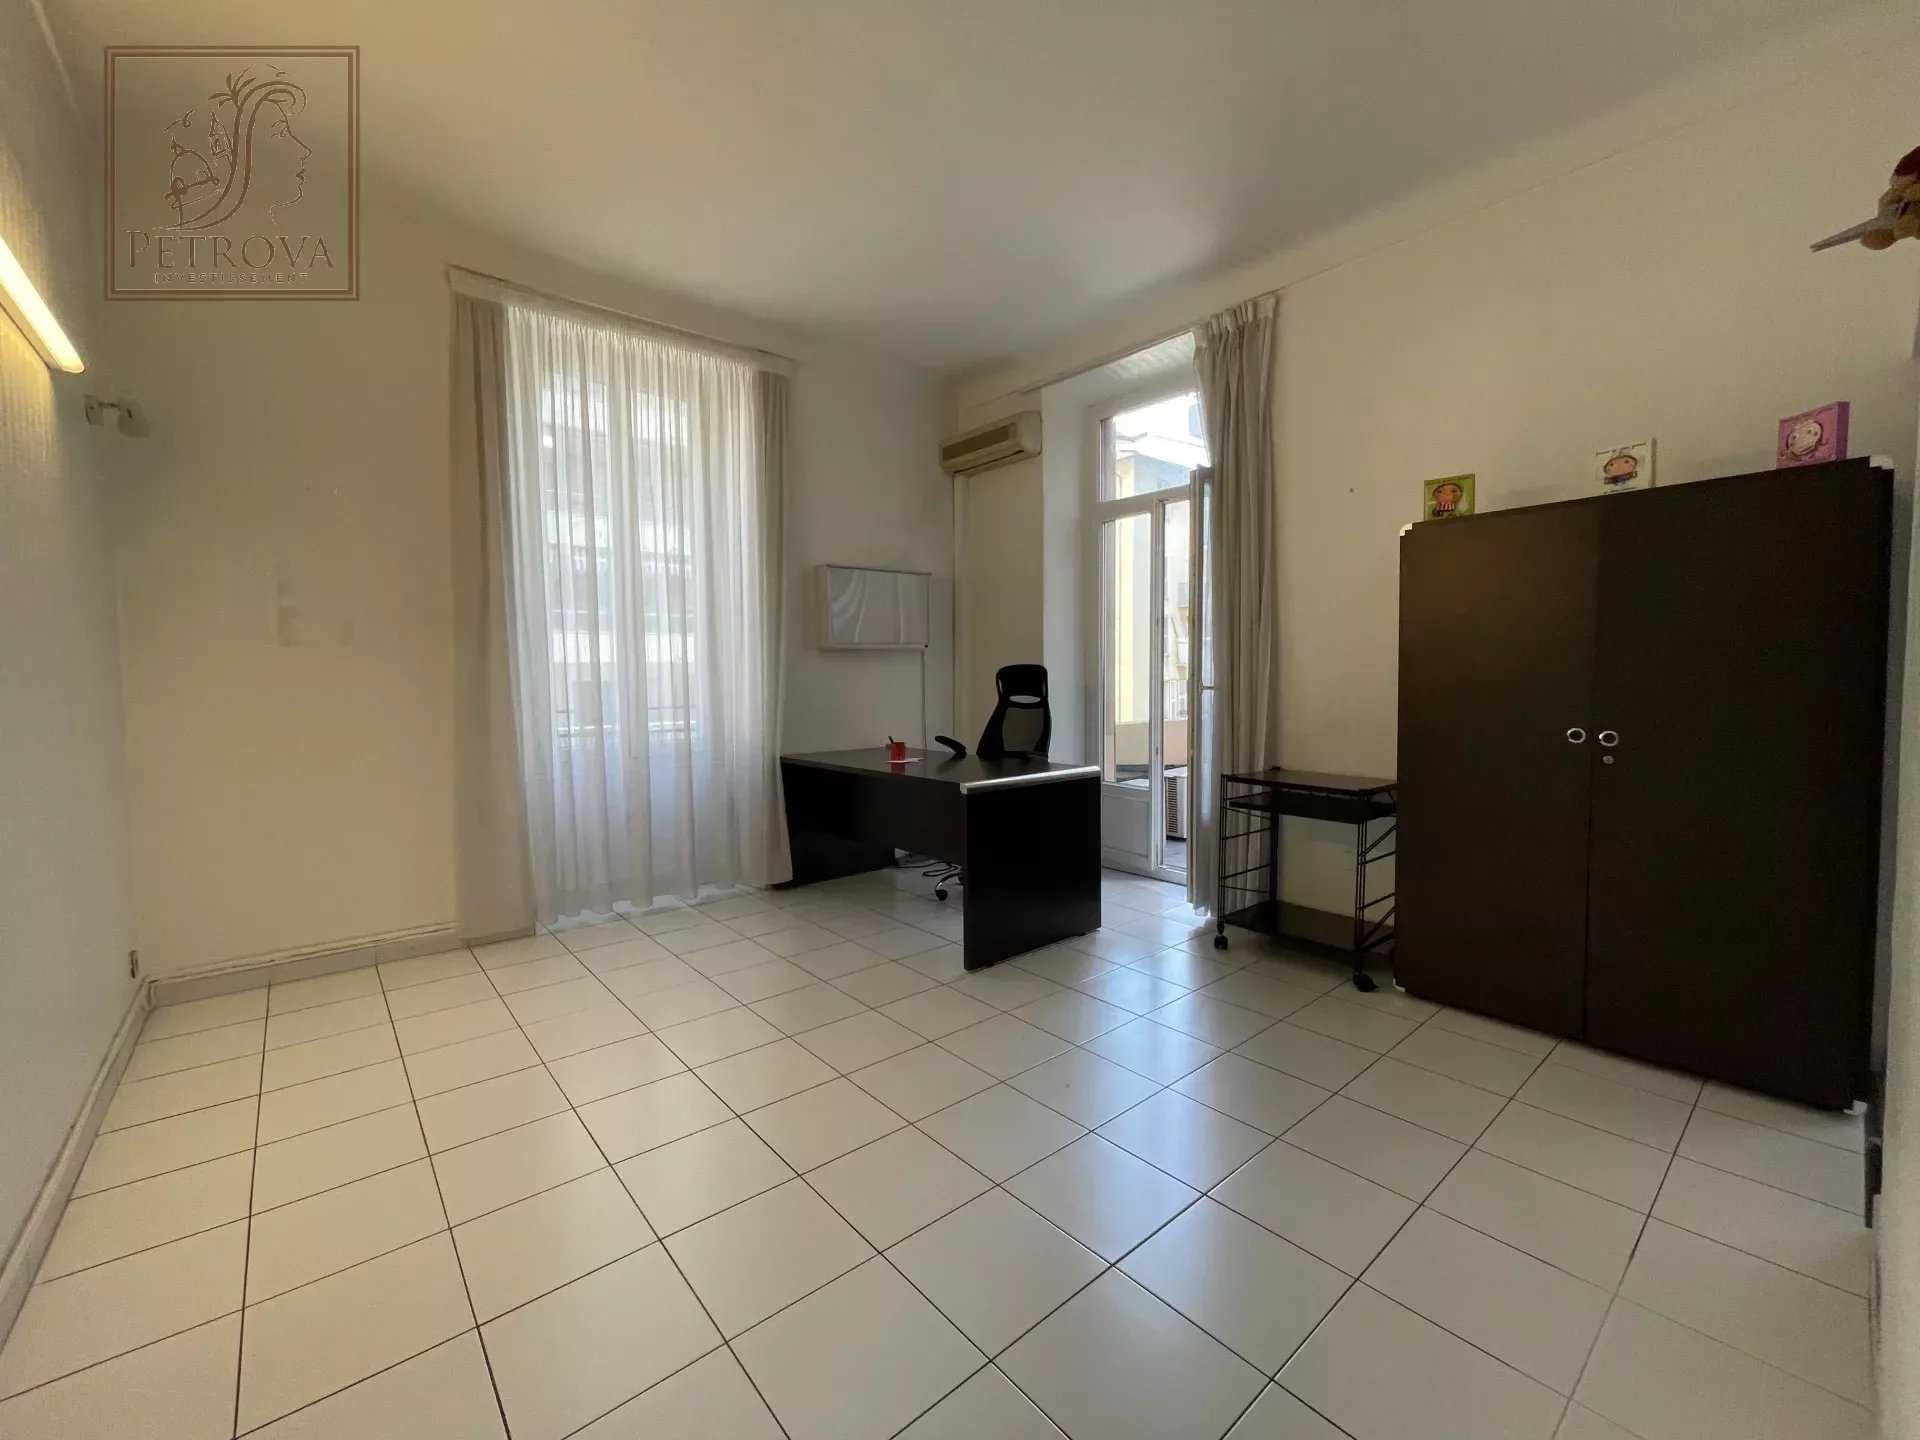 Office in Nice, Provence-Alpes-Cote d'Azur 12112050